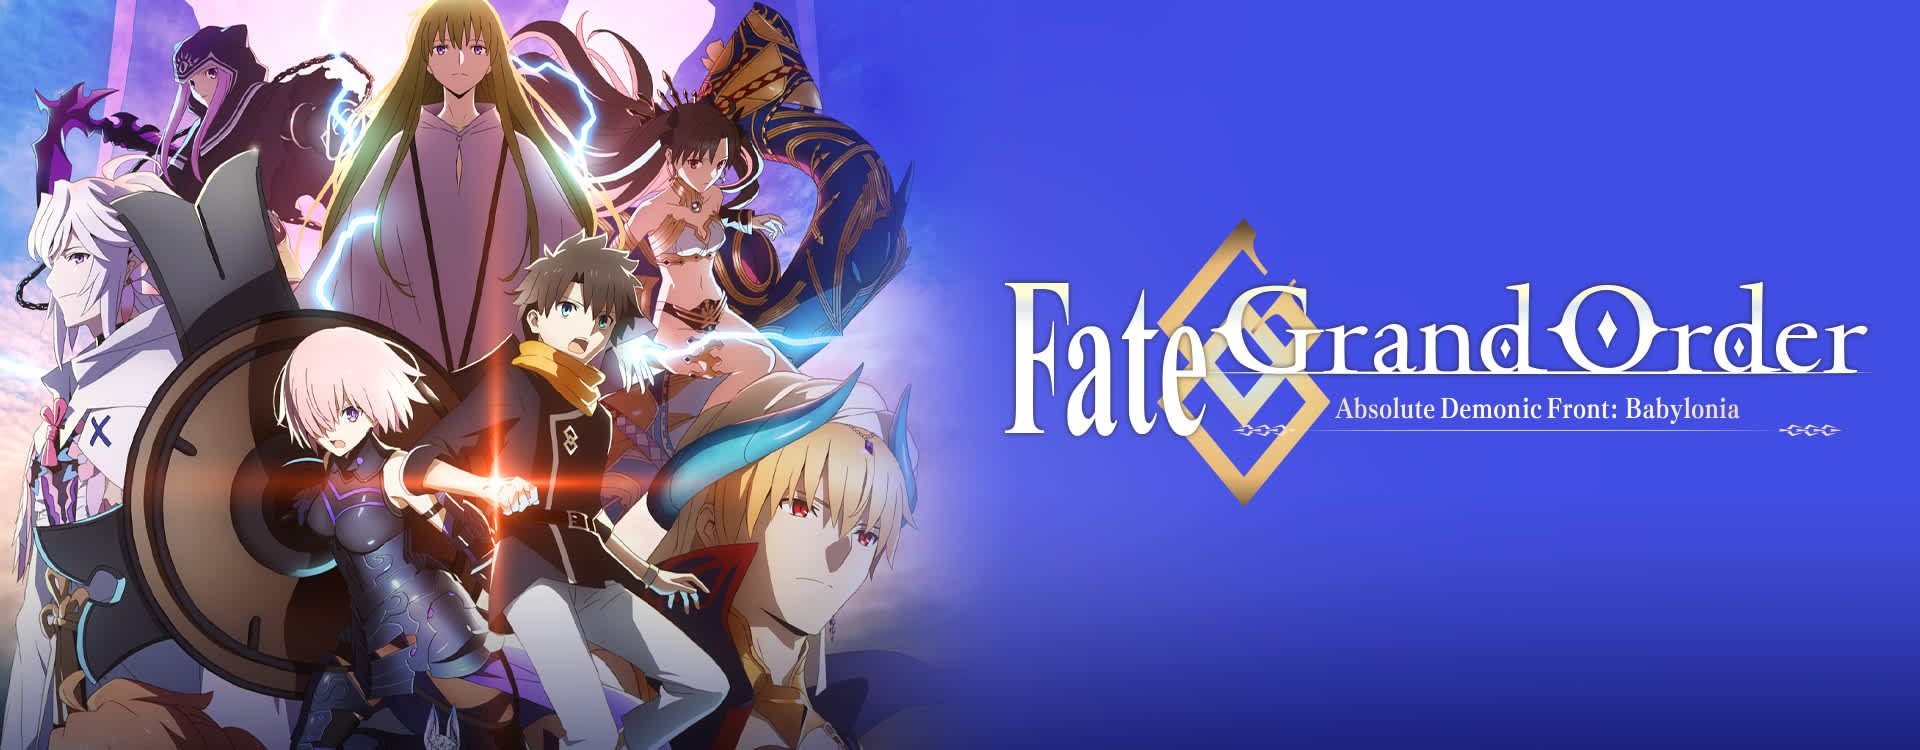 English Dub Review: Fate Grand Order Absolute Demonic Front: Babylonia; “The New Humanity”